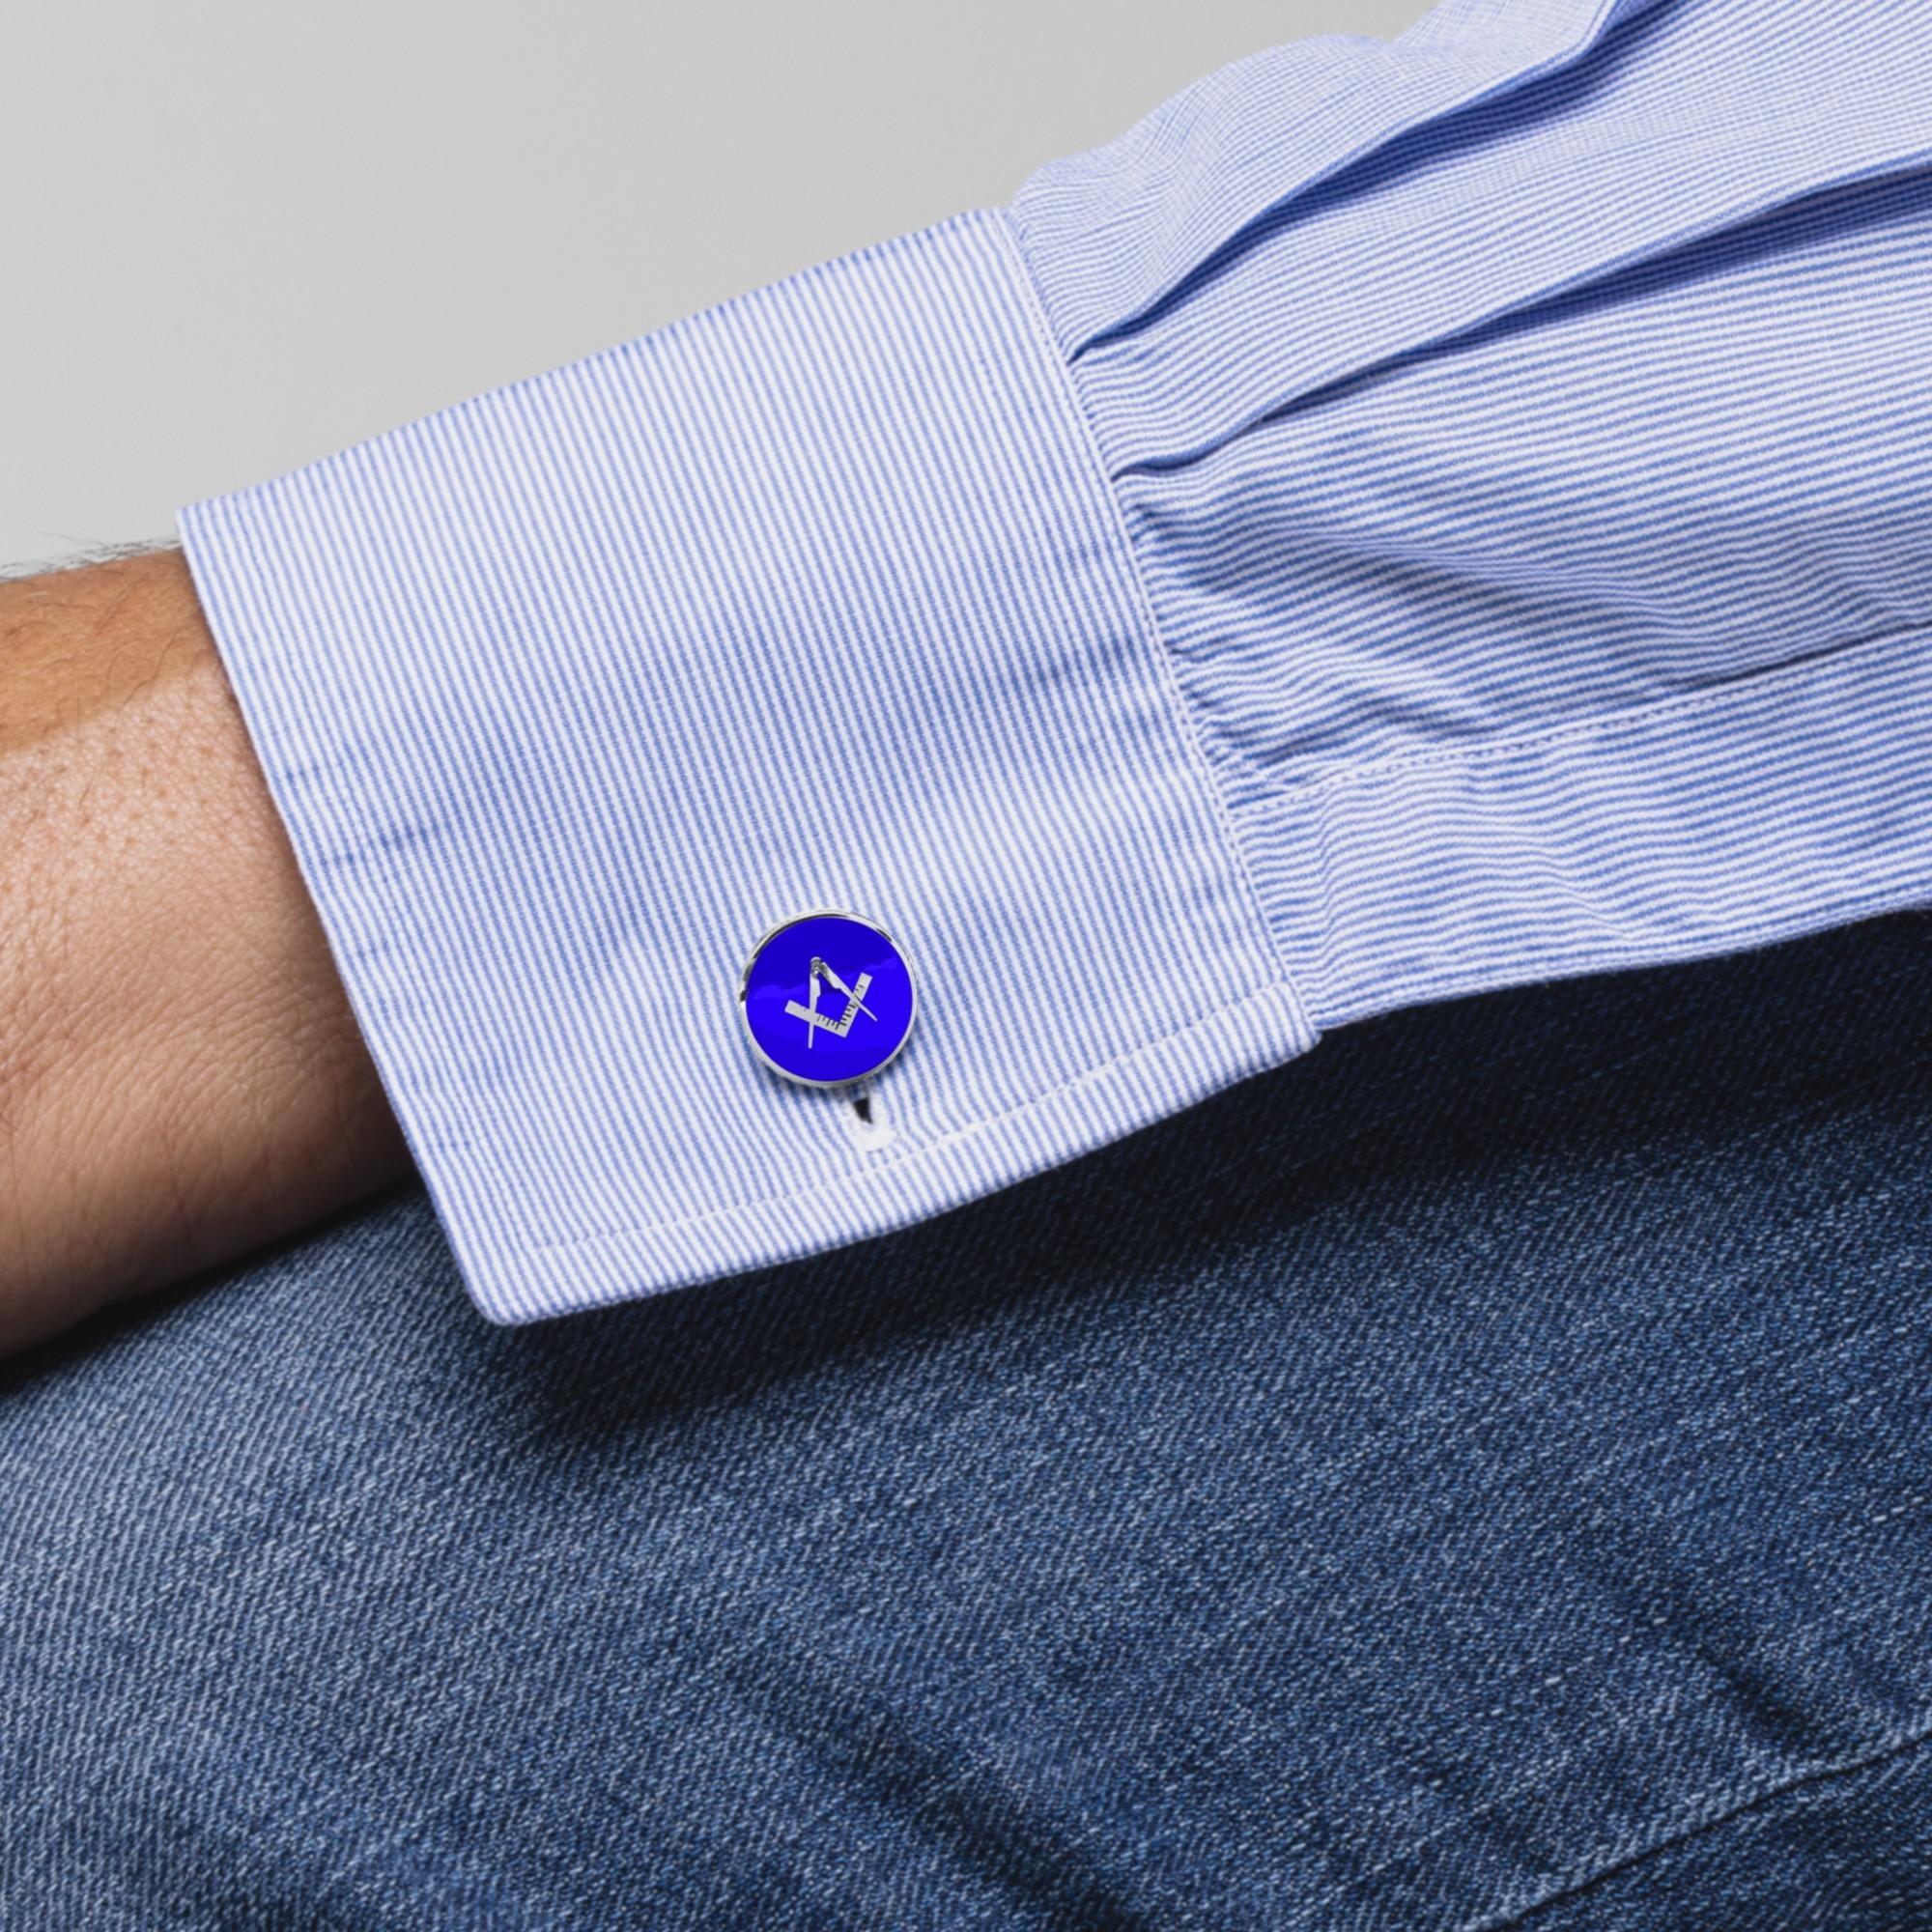 Alex Jona design collection, hand crafted in Italy, Sterling Silver Cufflinks with blue enamel. Marked Alex Jona-925. These cufflinks feature a T-Bar fastening, aiding in easy use and confidence that they'll stay secured to your shirt. 
Alex Jona